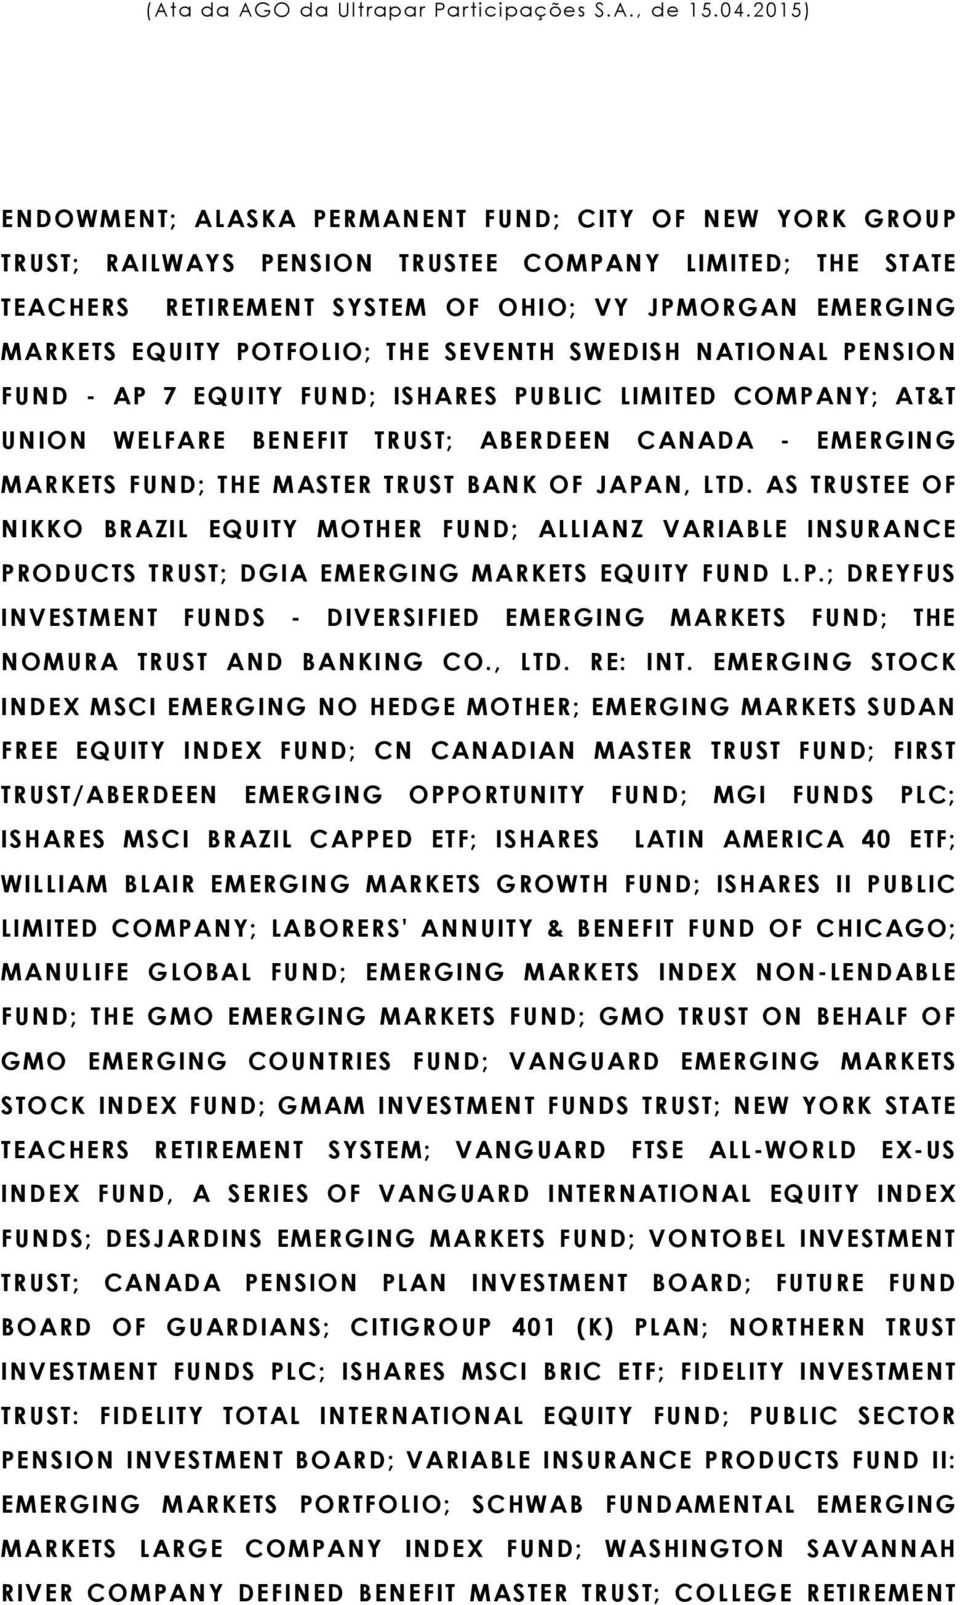 JAPAN, LTD. AS TRUSTEE OF NIKKO BRAZIL EQUITY MOTHER FUND; ALLIANZ VARIABLE INSURANCE PRODUCTS TRUST; DGIA EMERGING MARKETS EQUITY FUND L.P.; DREYFUS INVESTMENT FUNDS - DIVERSIFIED EMERGING MARKETS FUND; THE NOMURA TRUST AND BANKING CO.